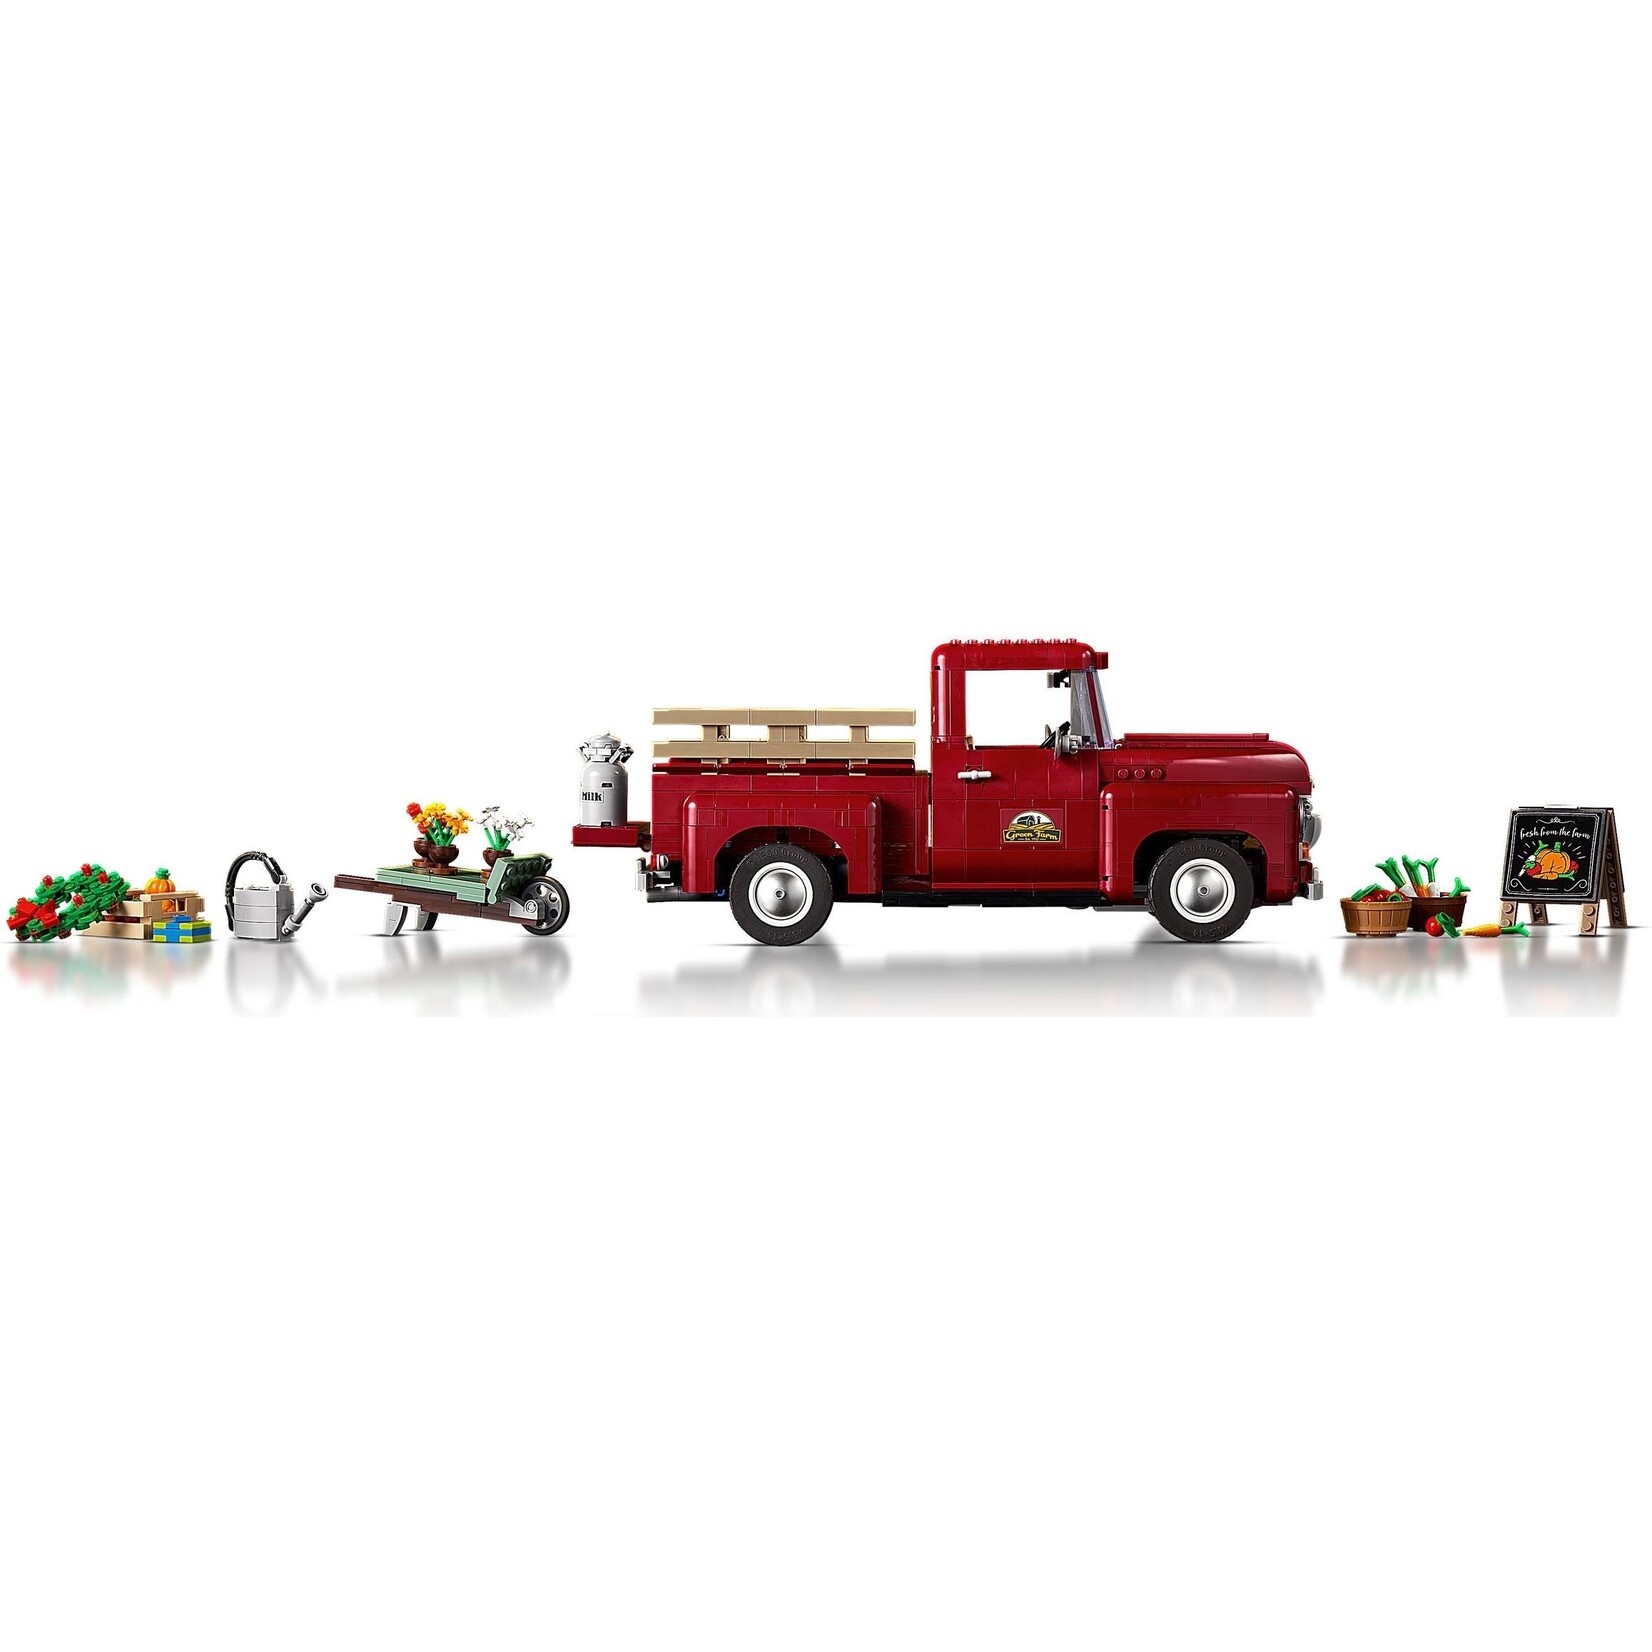 LEGO Pick-up Truck - 10290